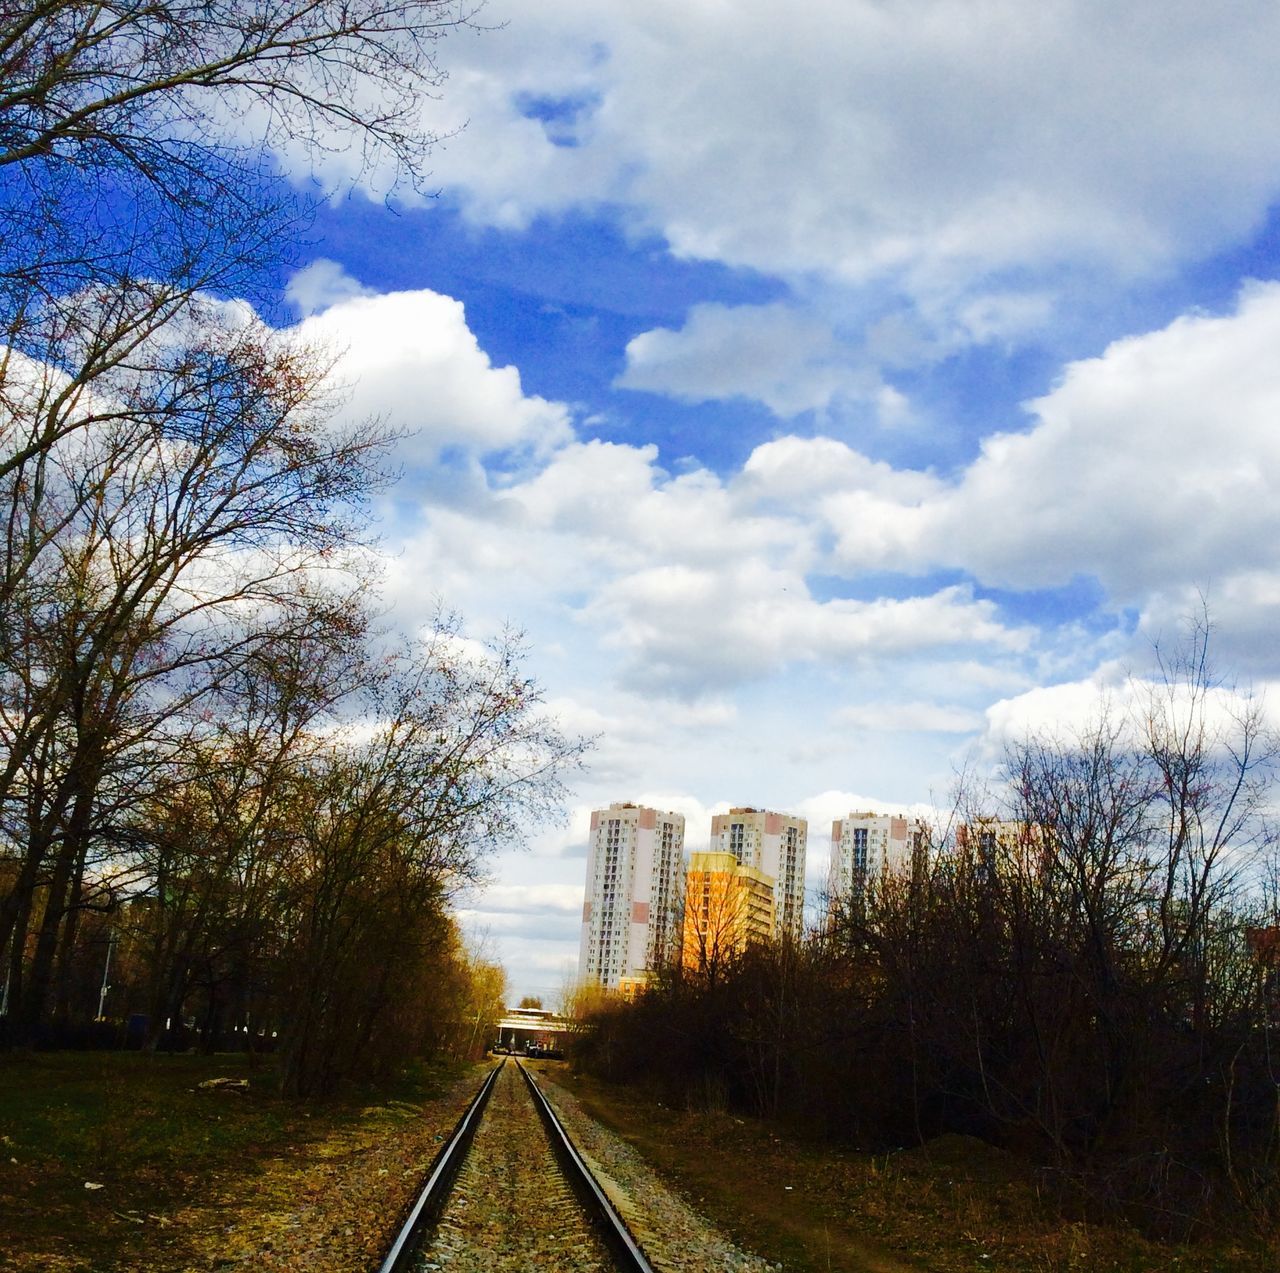 the way forward, transportation, diminishing perspective, sky, railroad track, tree, vanishing point, cloud - sky, rail transportation, built structure, architecture, building exterior, road, cloud, cloudy, day, outdoors, no people, long, bare tree